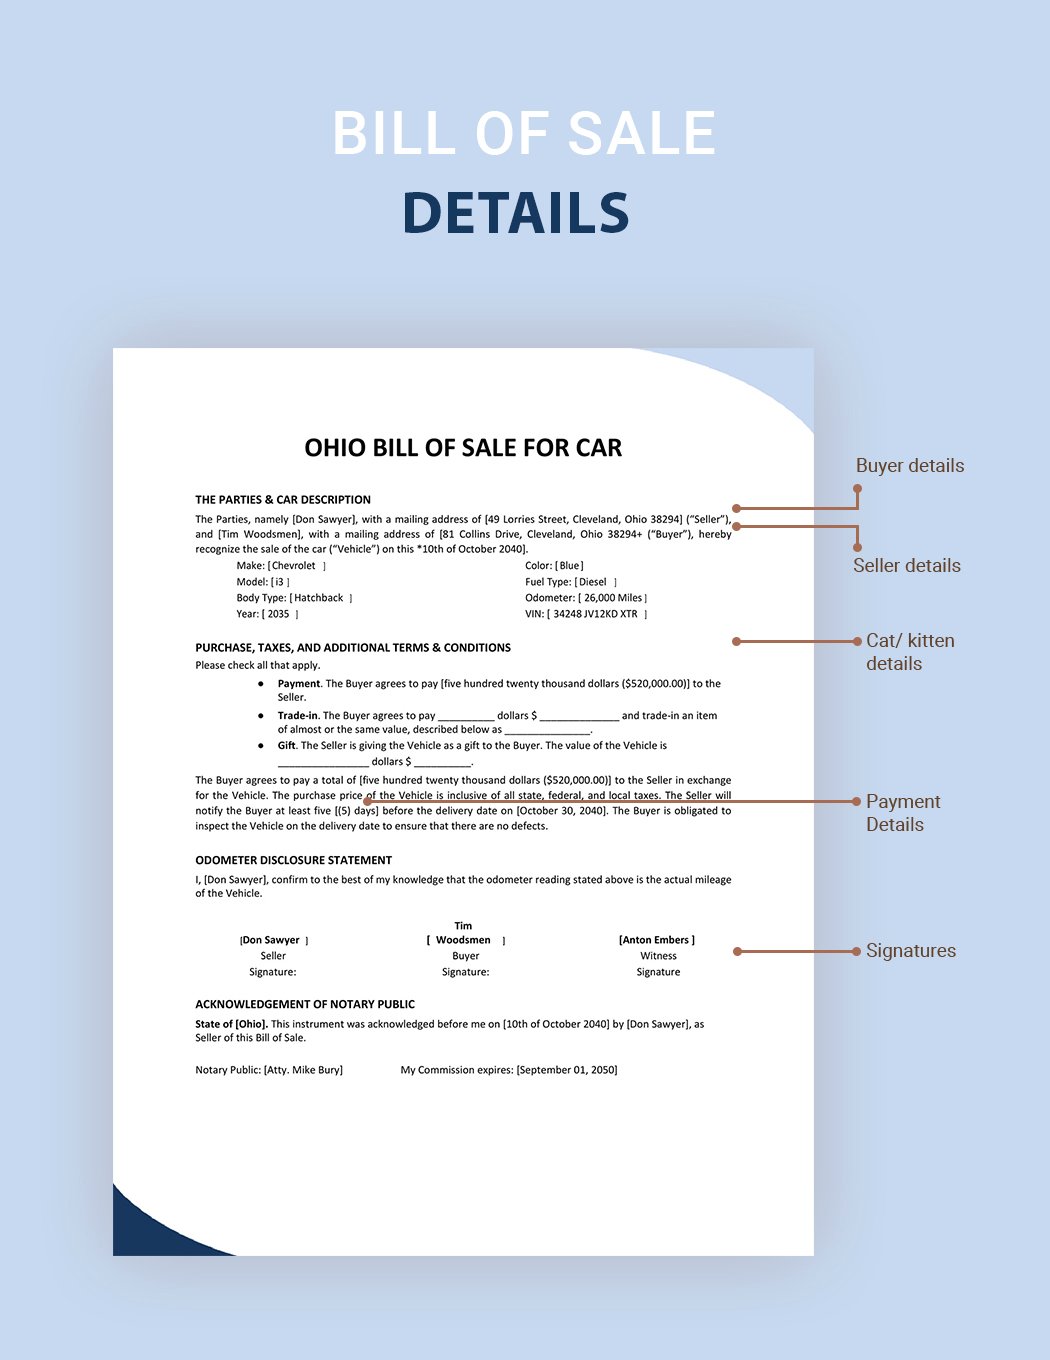 Ohio Bill of Sale For Car Template